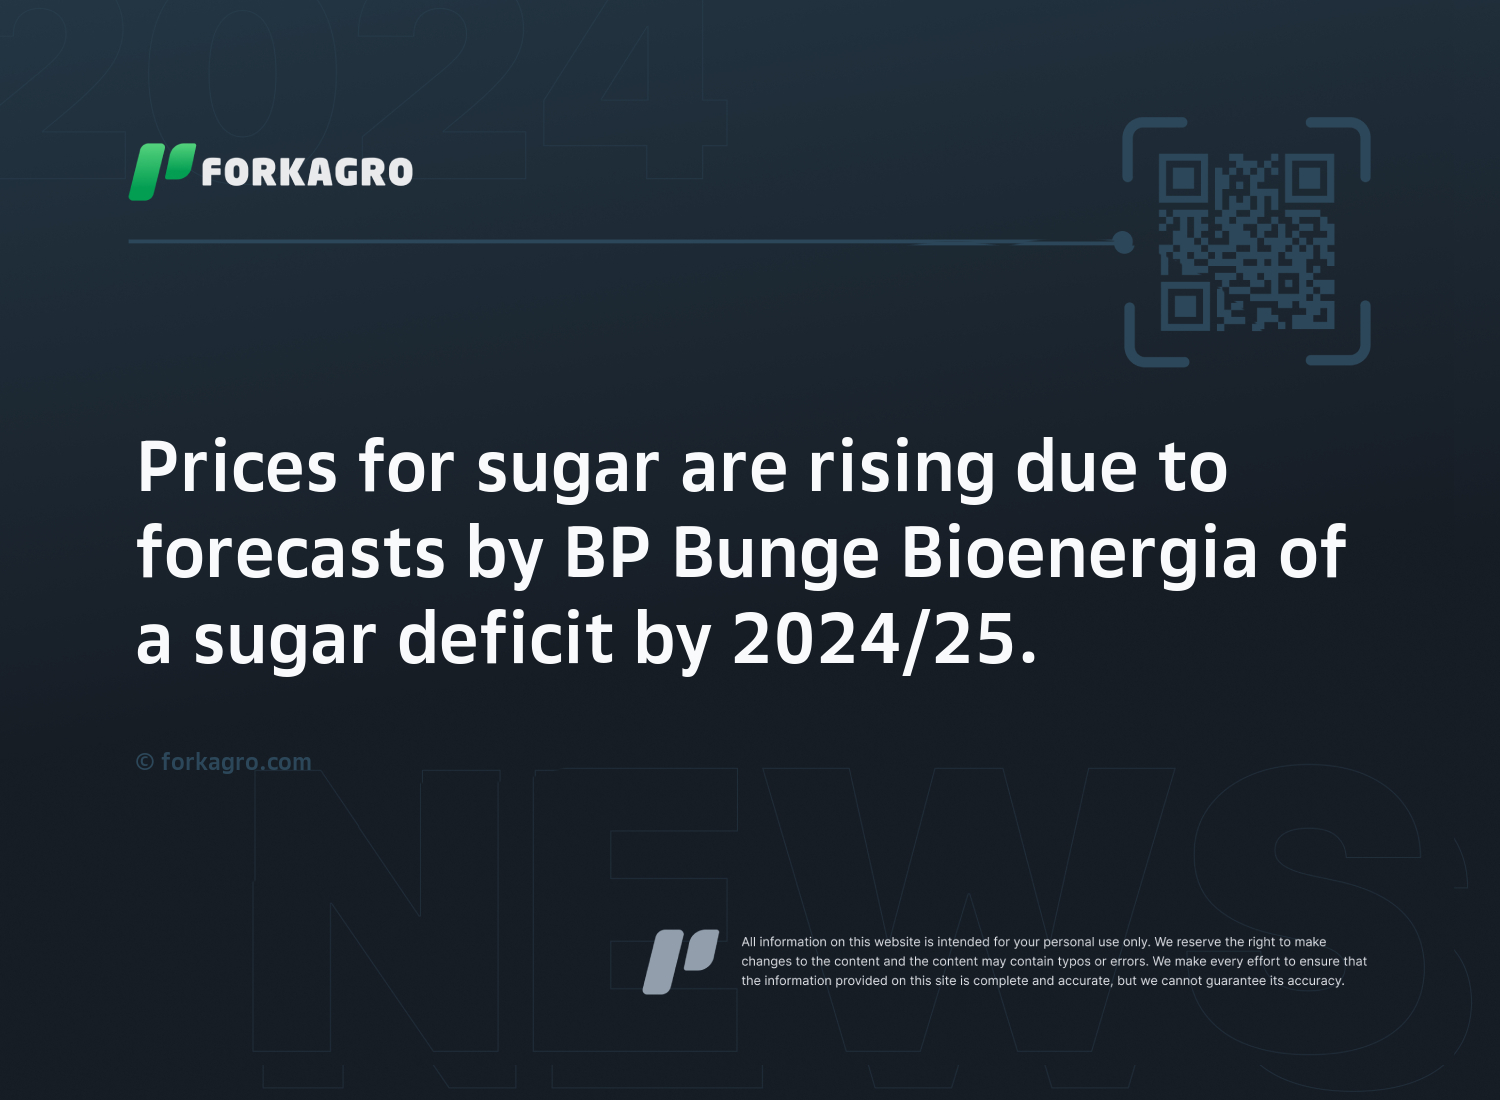 Prices for sugar are rising due to forecasts by BP Bunge Bioenergia of a sugar deficit by 2024/25.